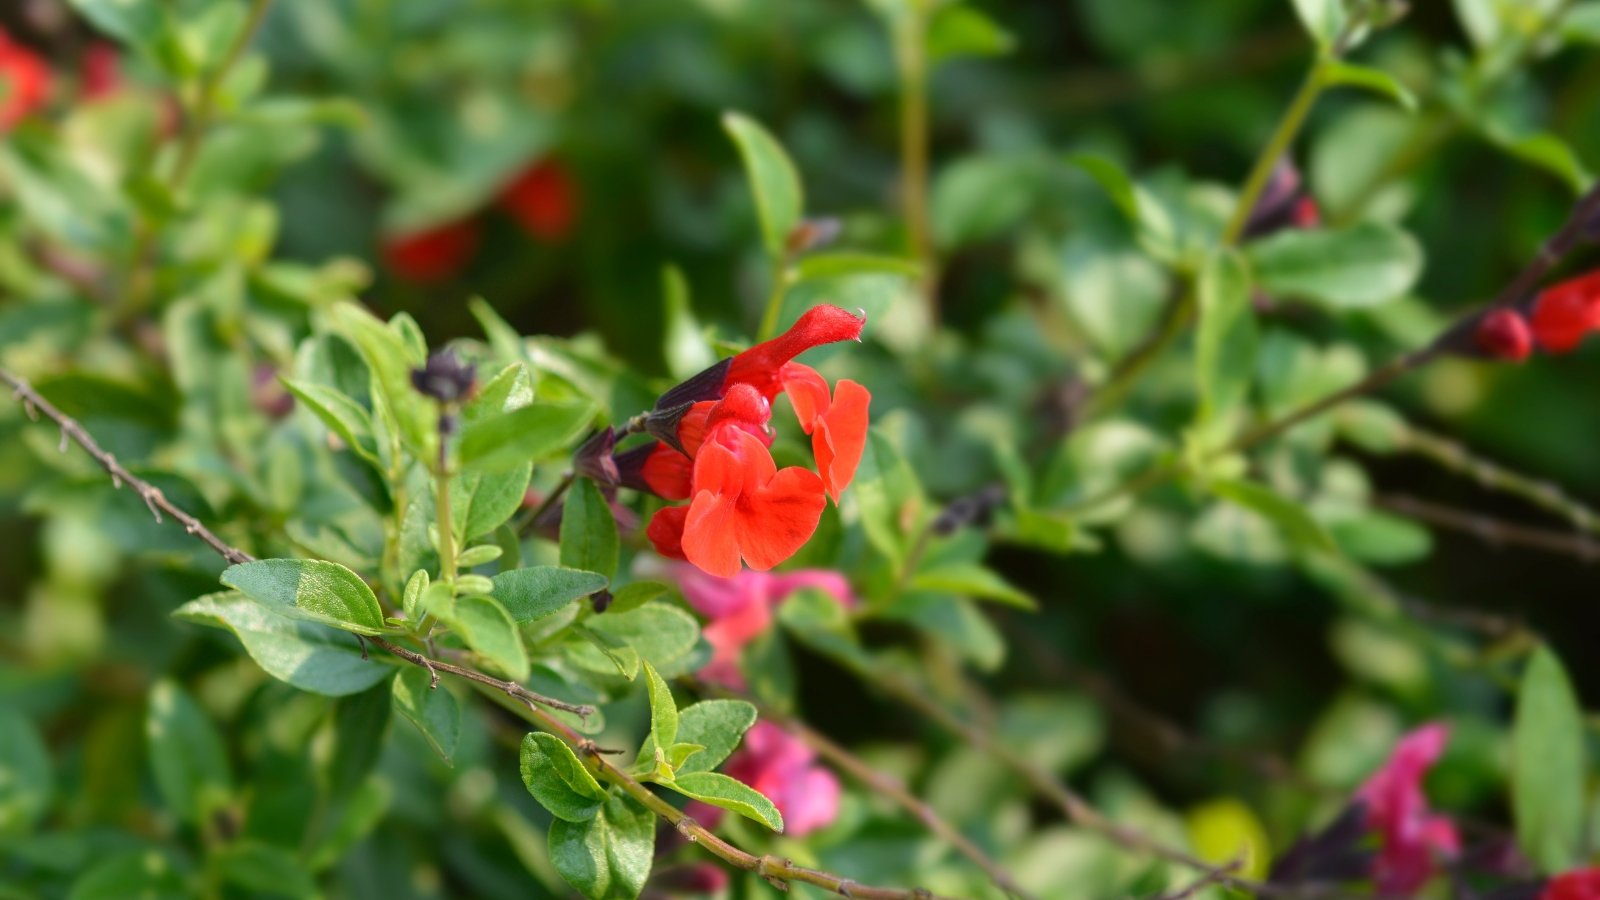 A close-up of a flowering Autumn Sage plant with small, tubular flowers in a vibrant red hue among slender stems covered in small, lanceolate-shaped, dark green leaves.